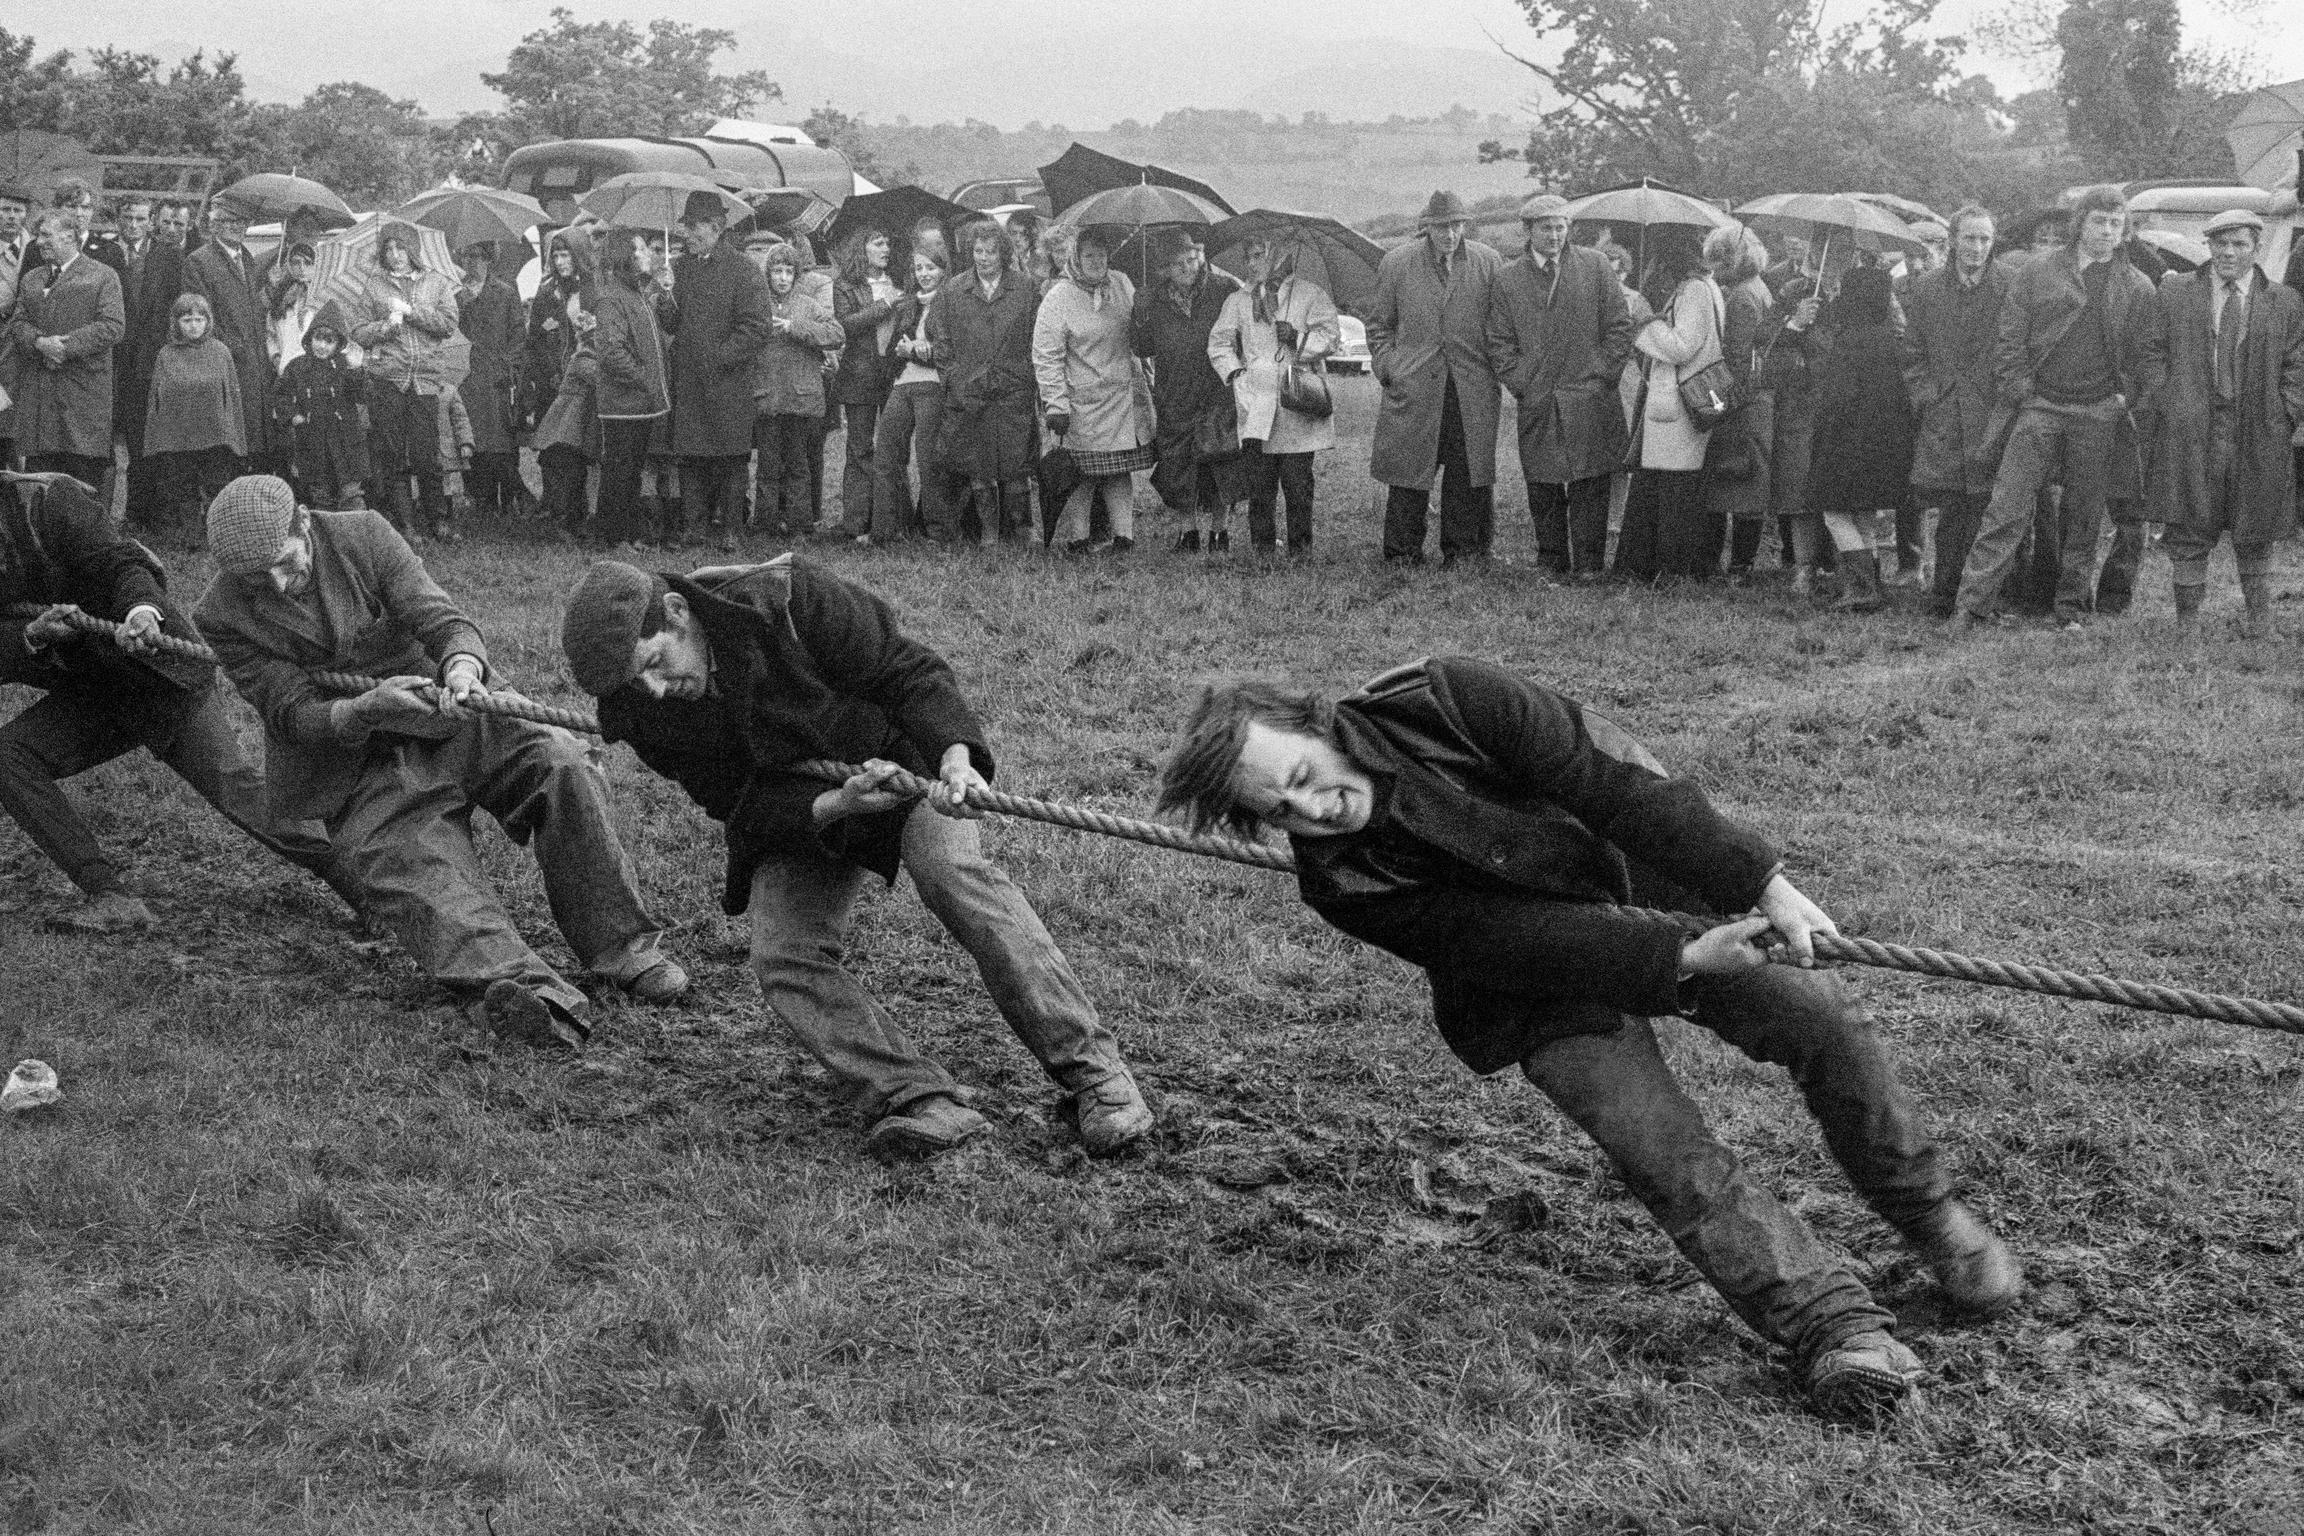 Tug of War at the Brecon YFC (Young Farmers Club) meeting. Brecon, Wales